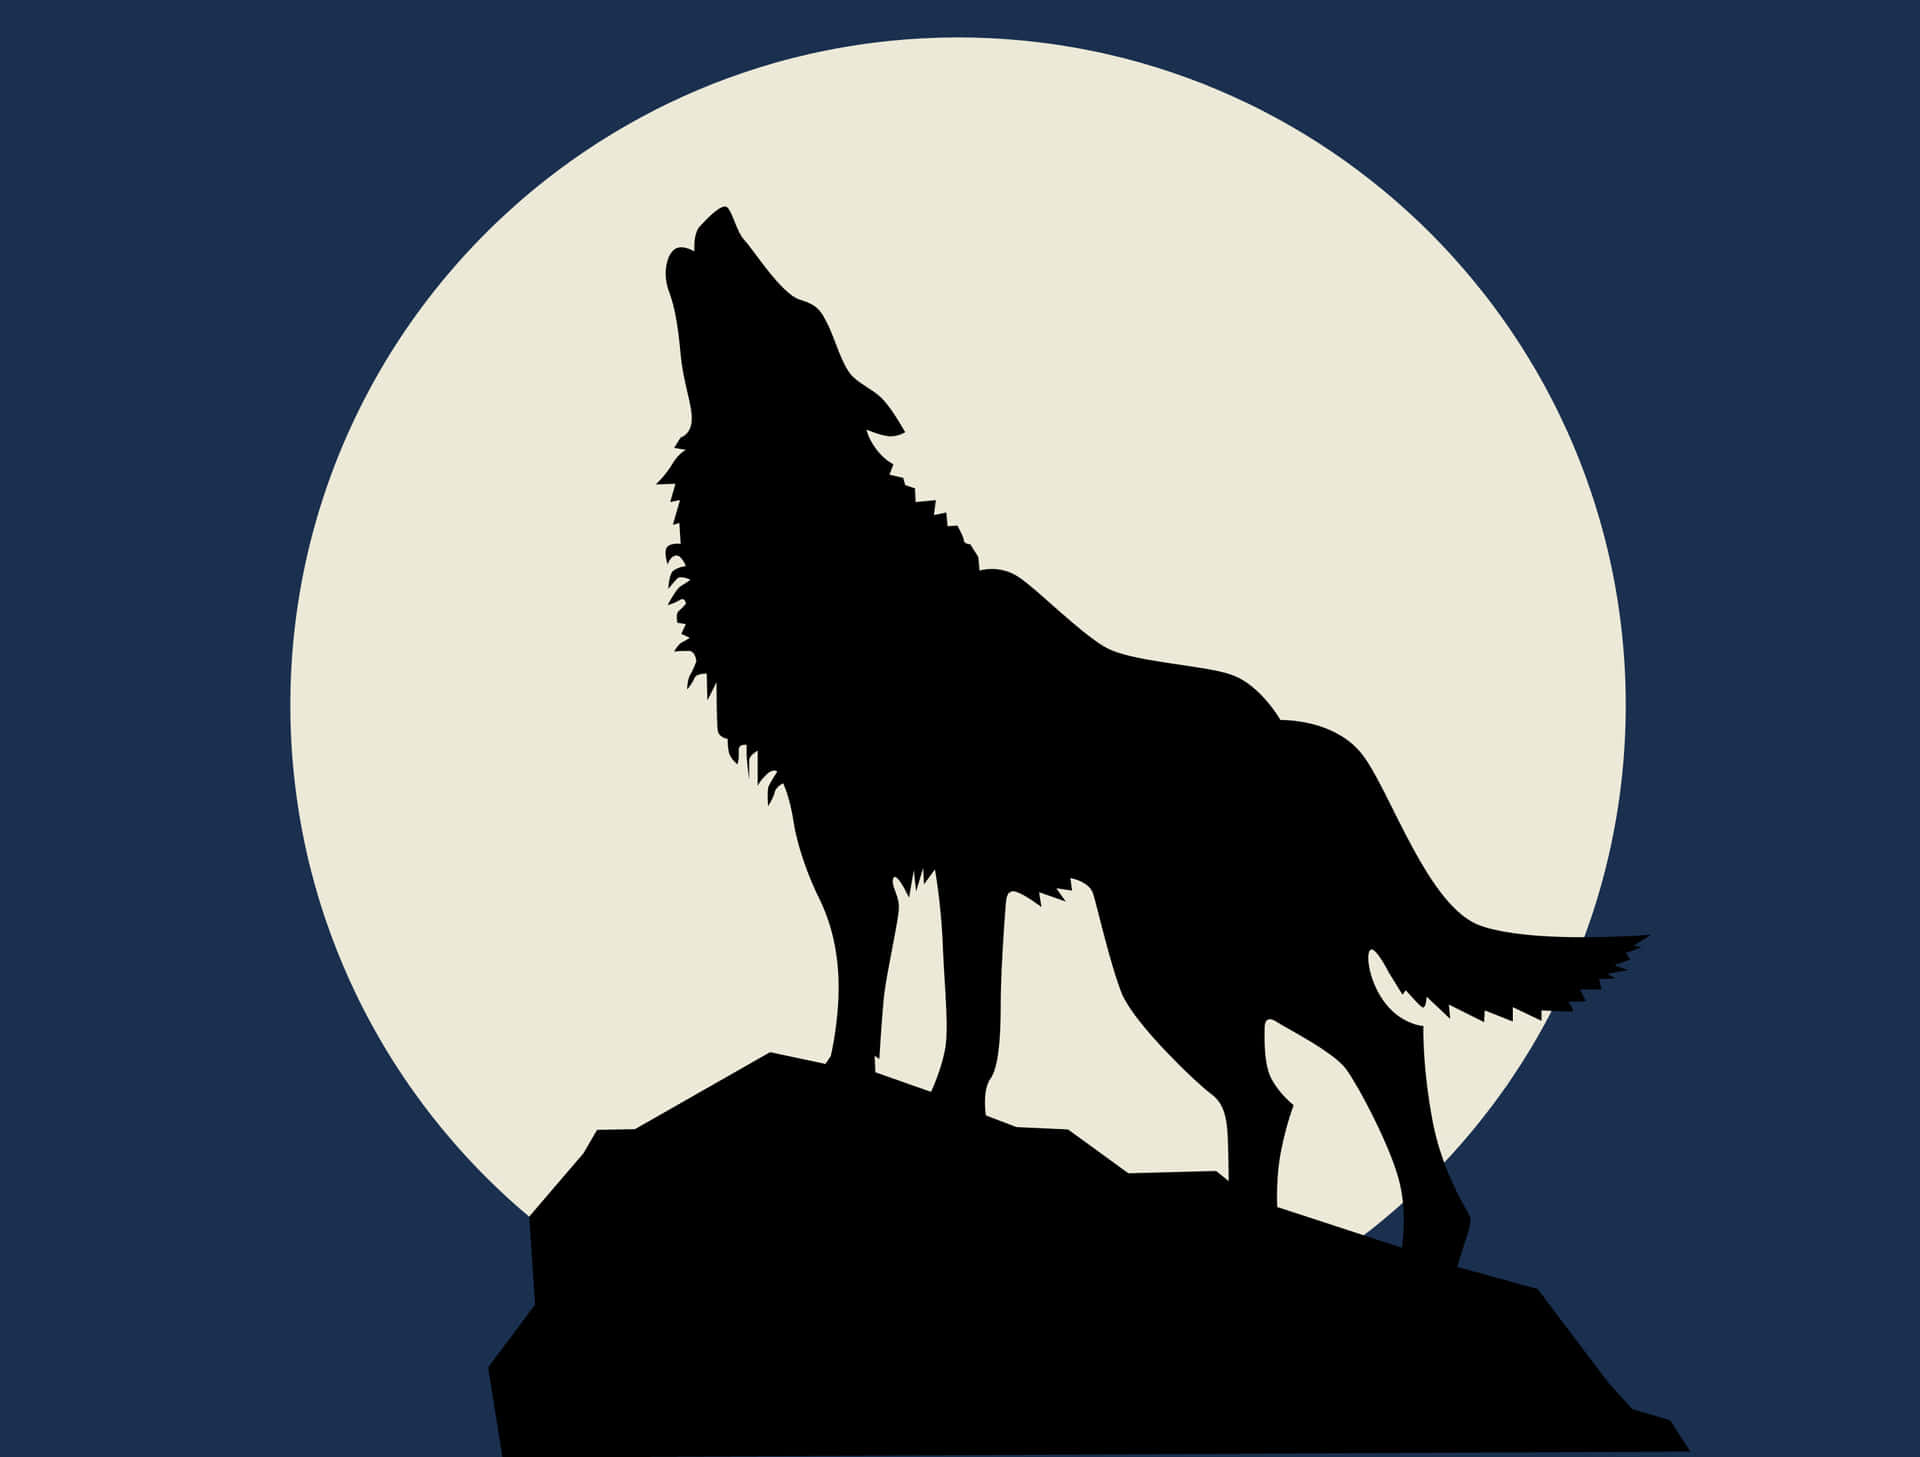 Majestic Wolf Silhouette Against a Stunning Sky Wallpaper